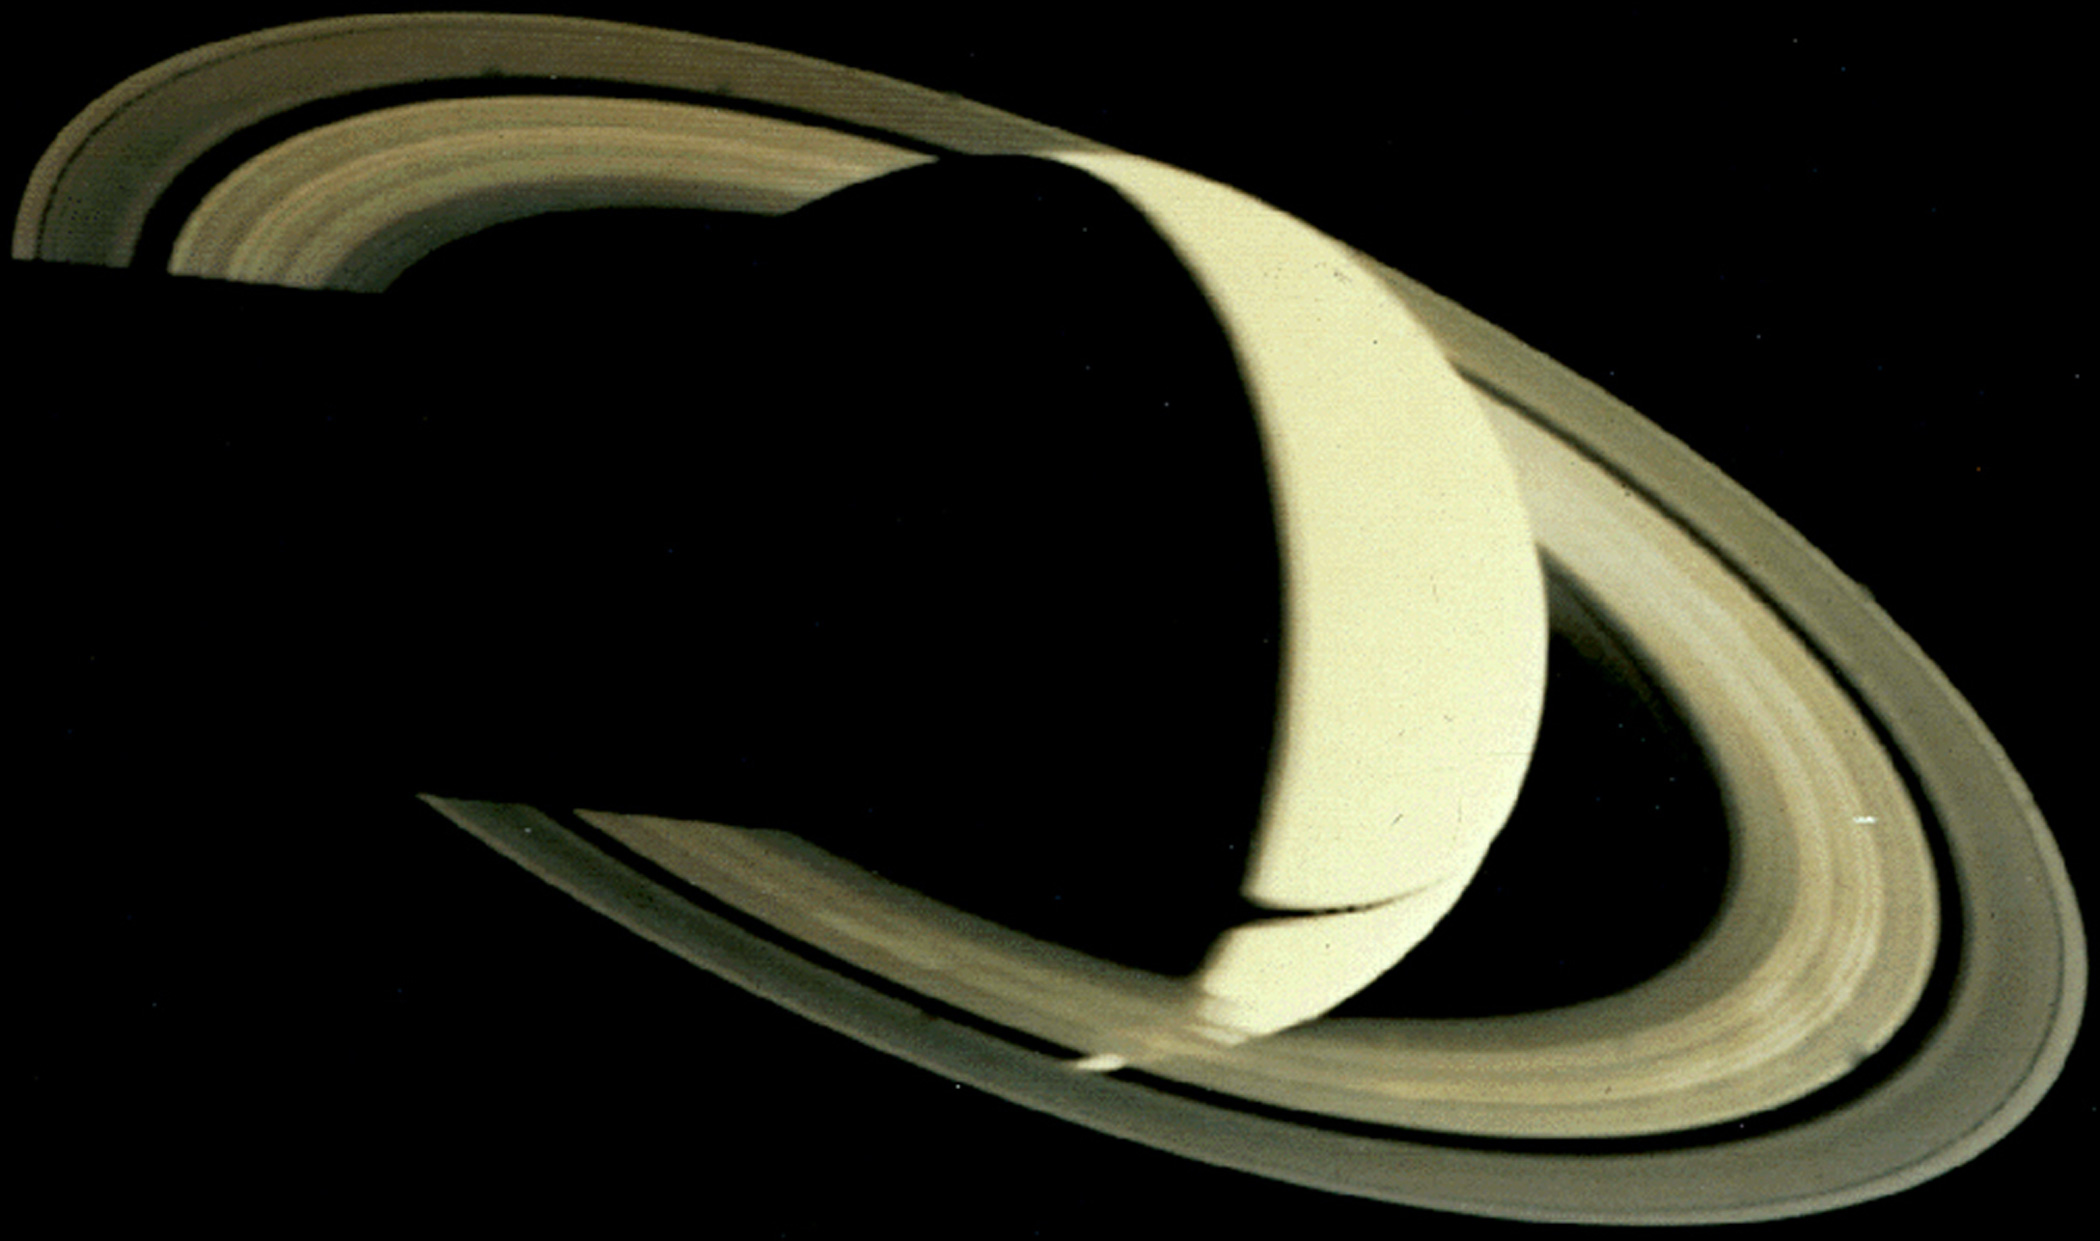 most-iconic-space-photo-voyager-saturn